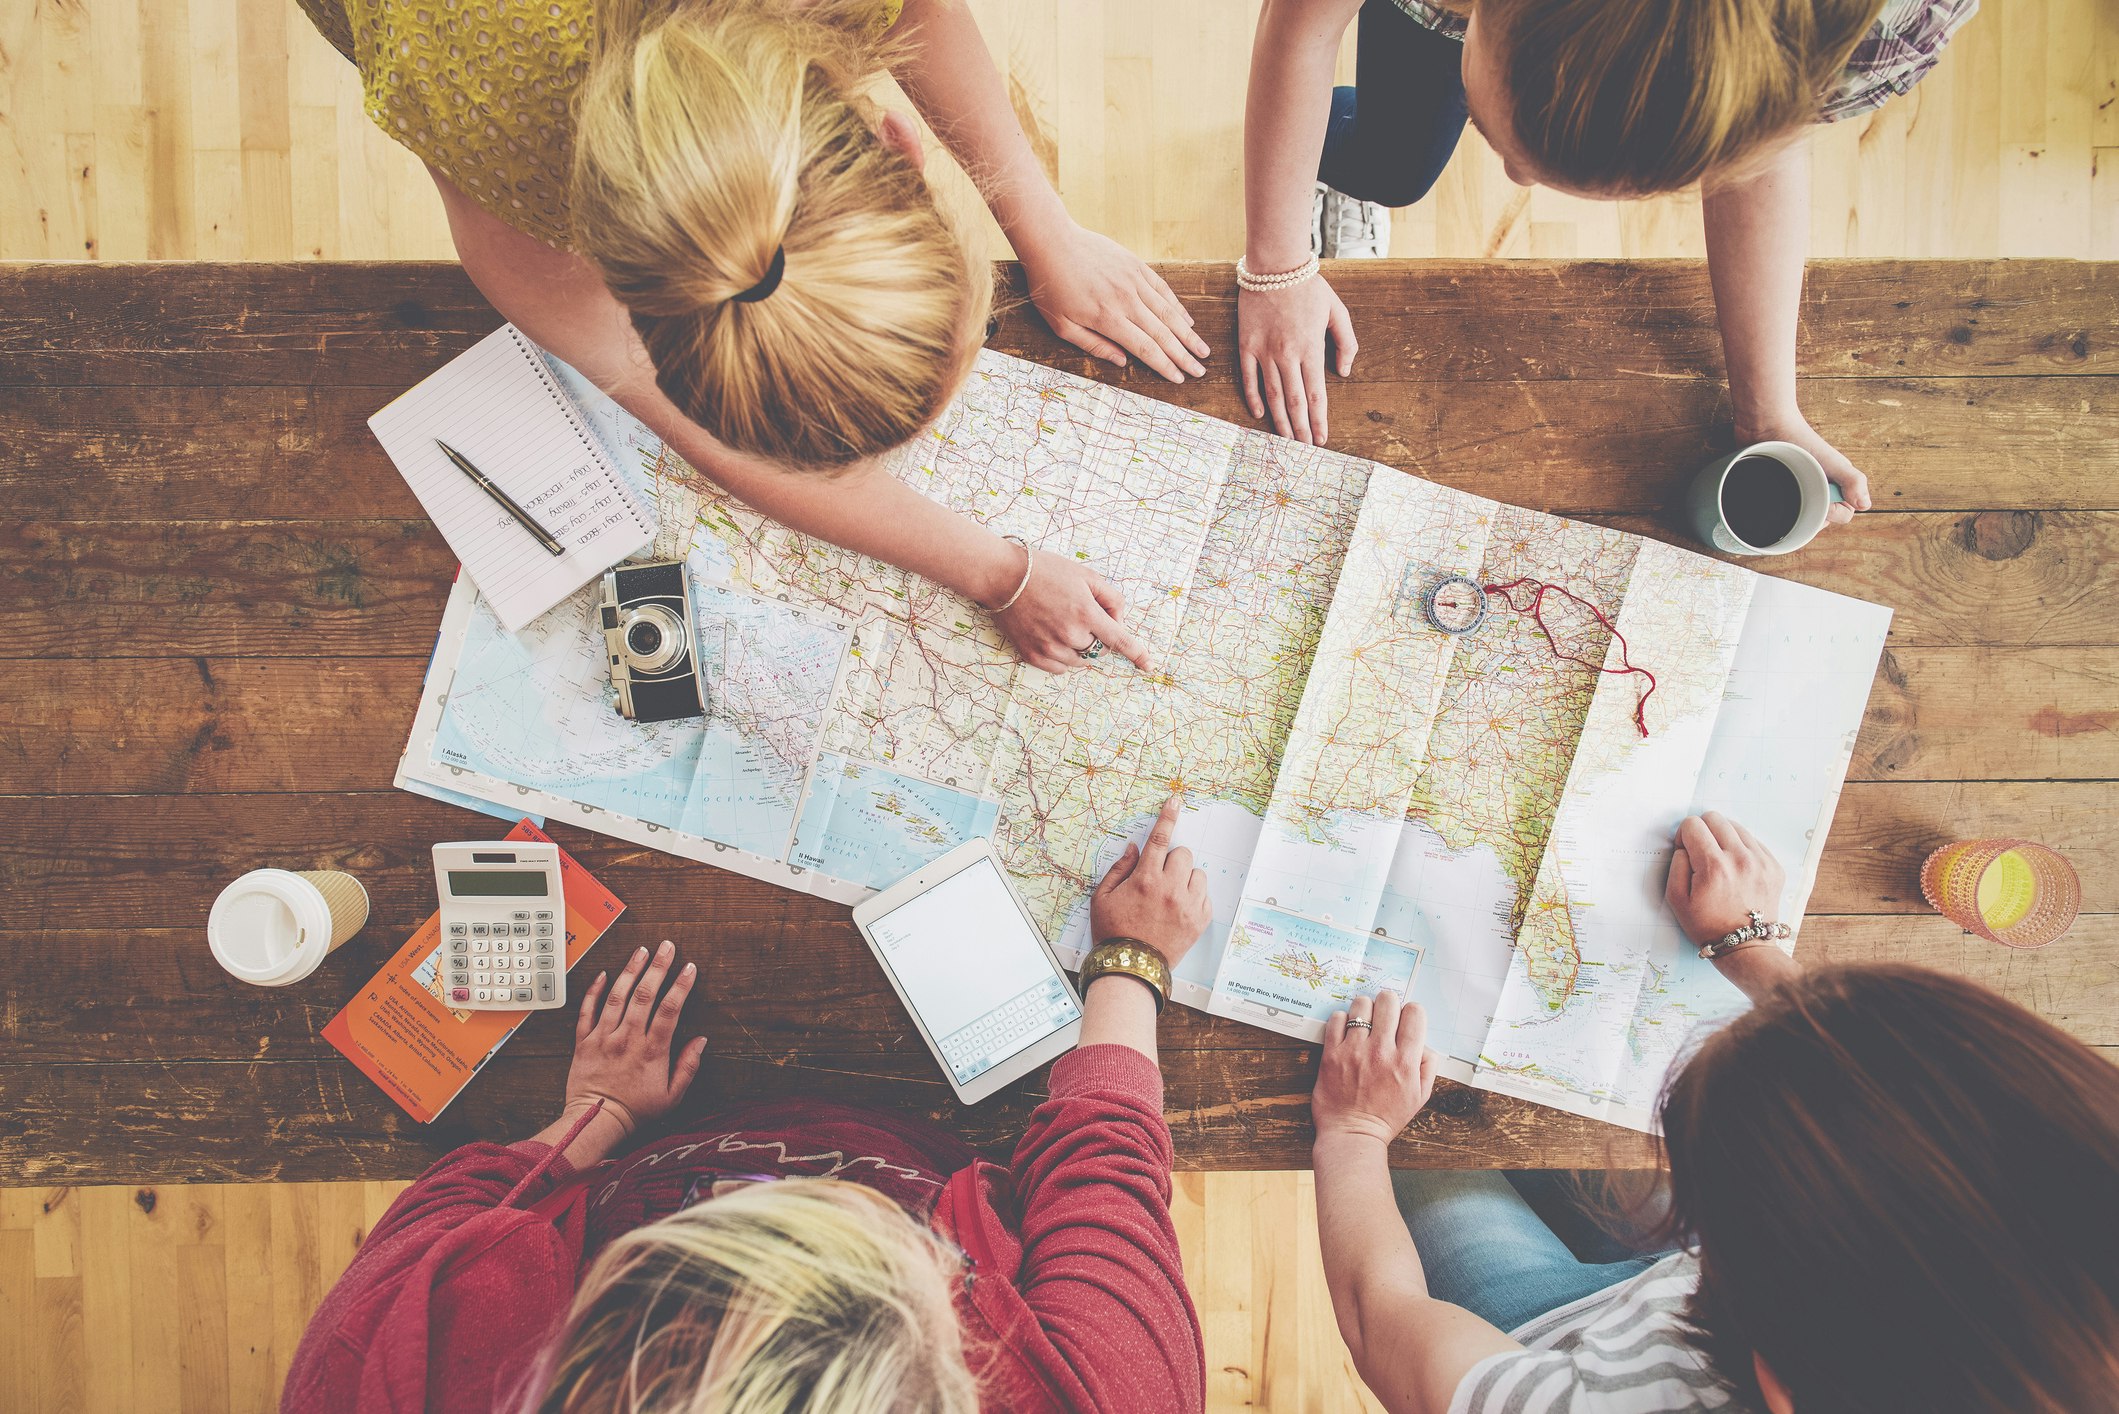 Women planning trip with map on wooden table